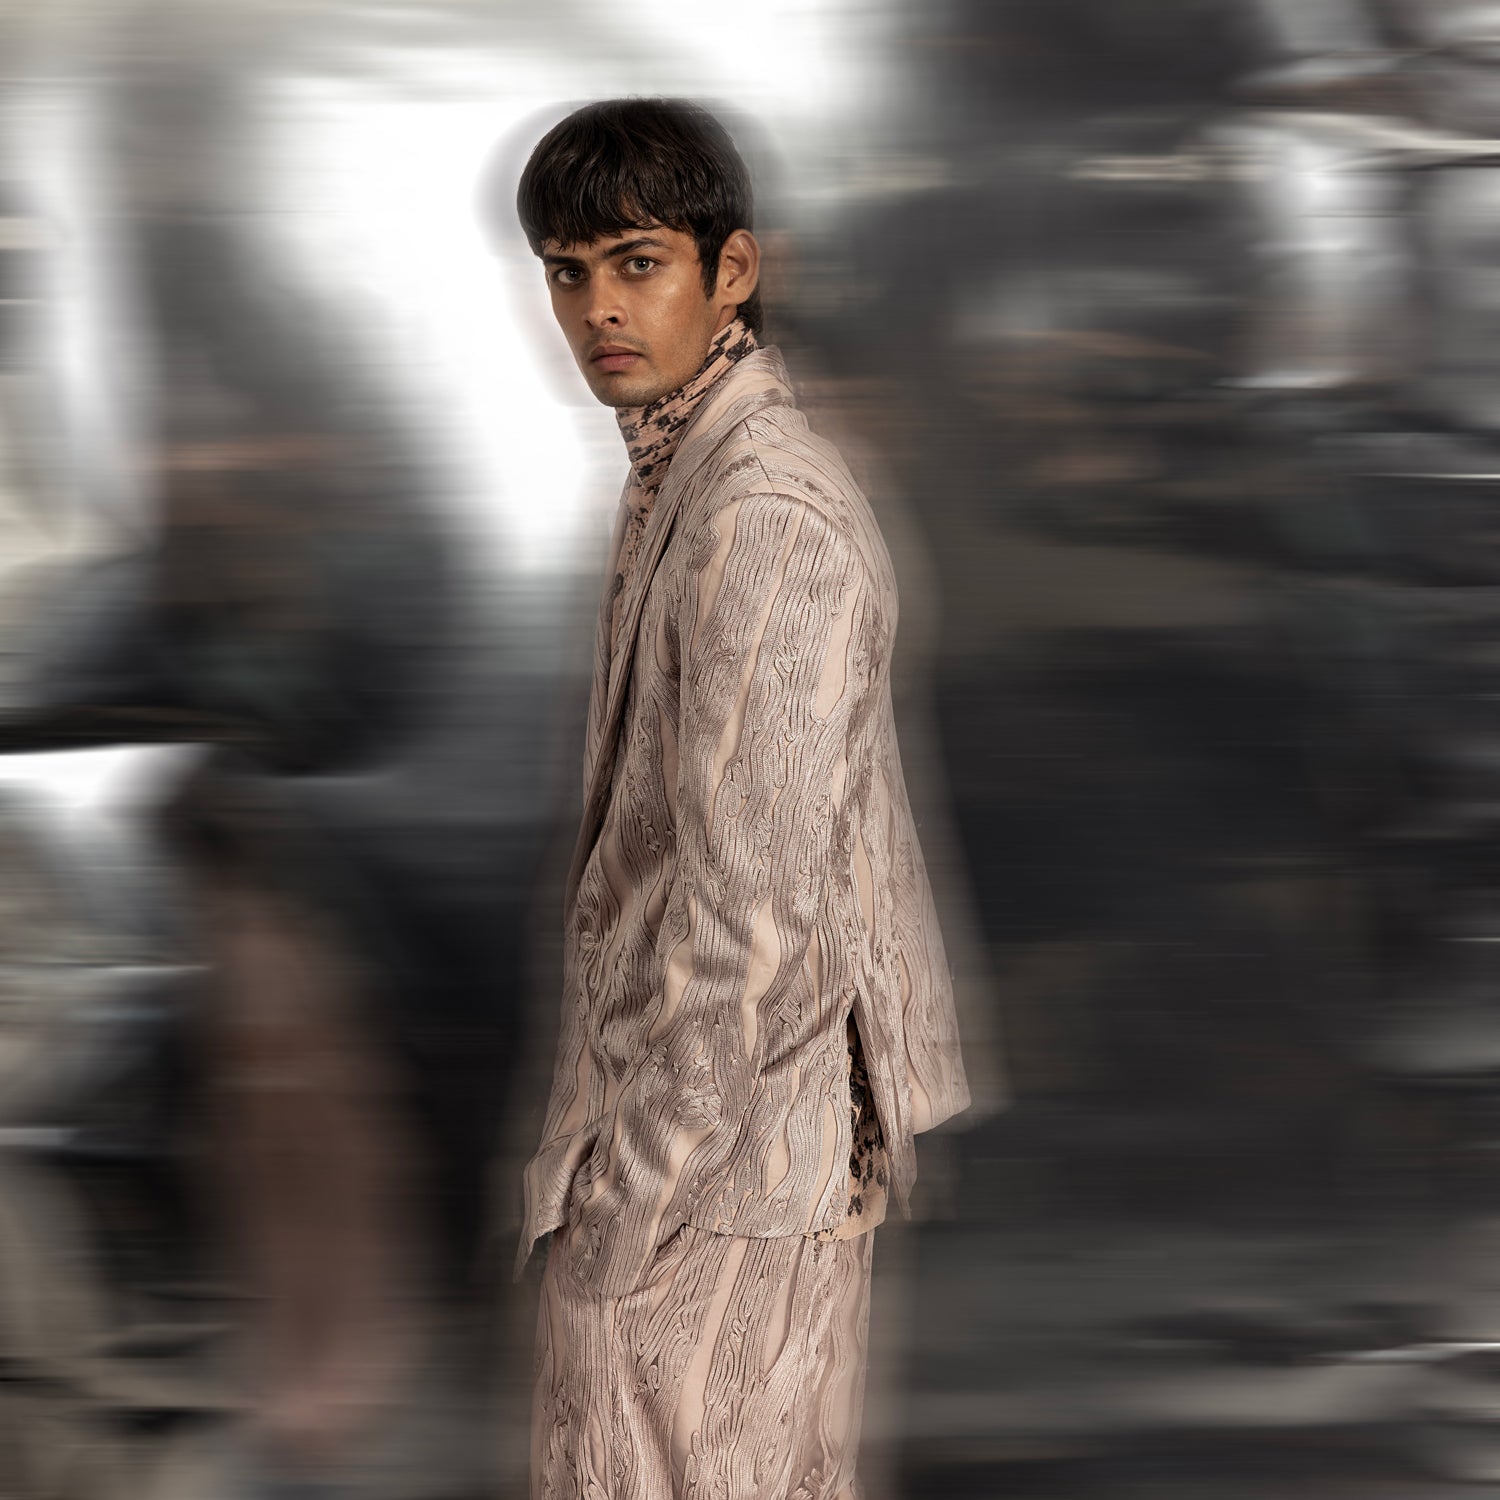 Shawl collar jacket embellished with graphic yarn couching in a linear pattern. The jacket is paired with matching wide hem yarn couching detailed trousers. A high-collar shirt in reef print makes a perfect ensemble for special occasions.  #abhisheksharma #fashiondesignerabhisheksharma #reef #redcarpet #shortdress #abhishekstudio #lfw #fdci 